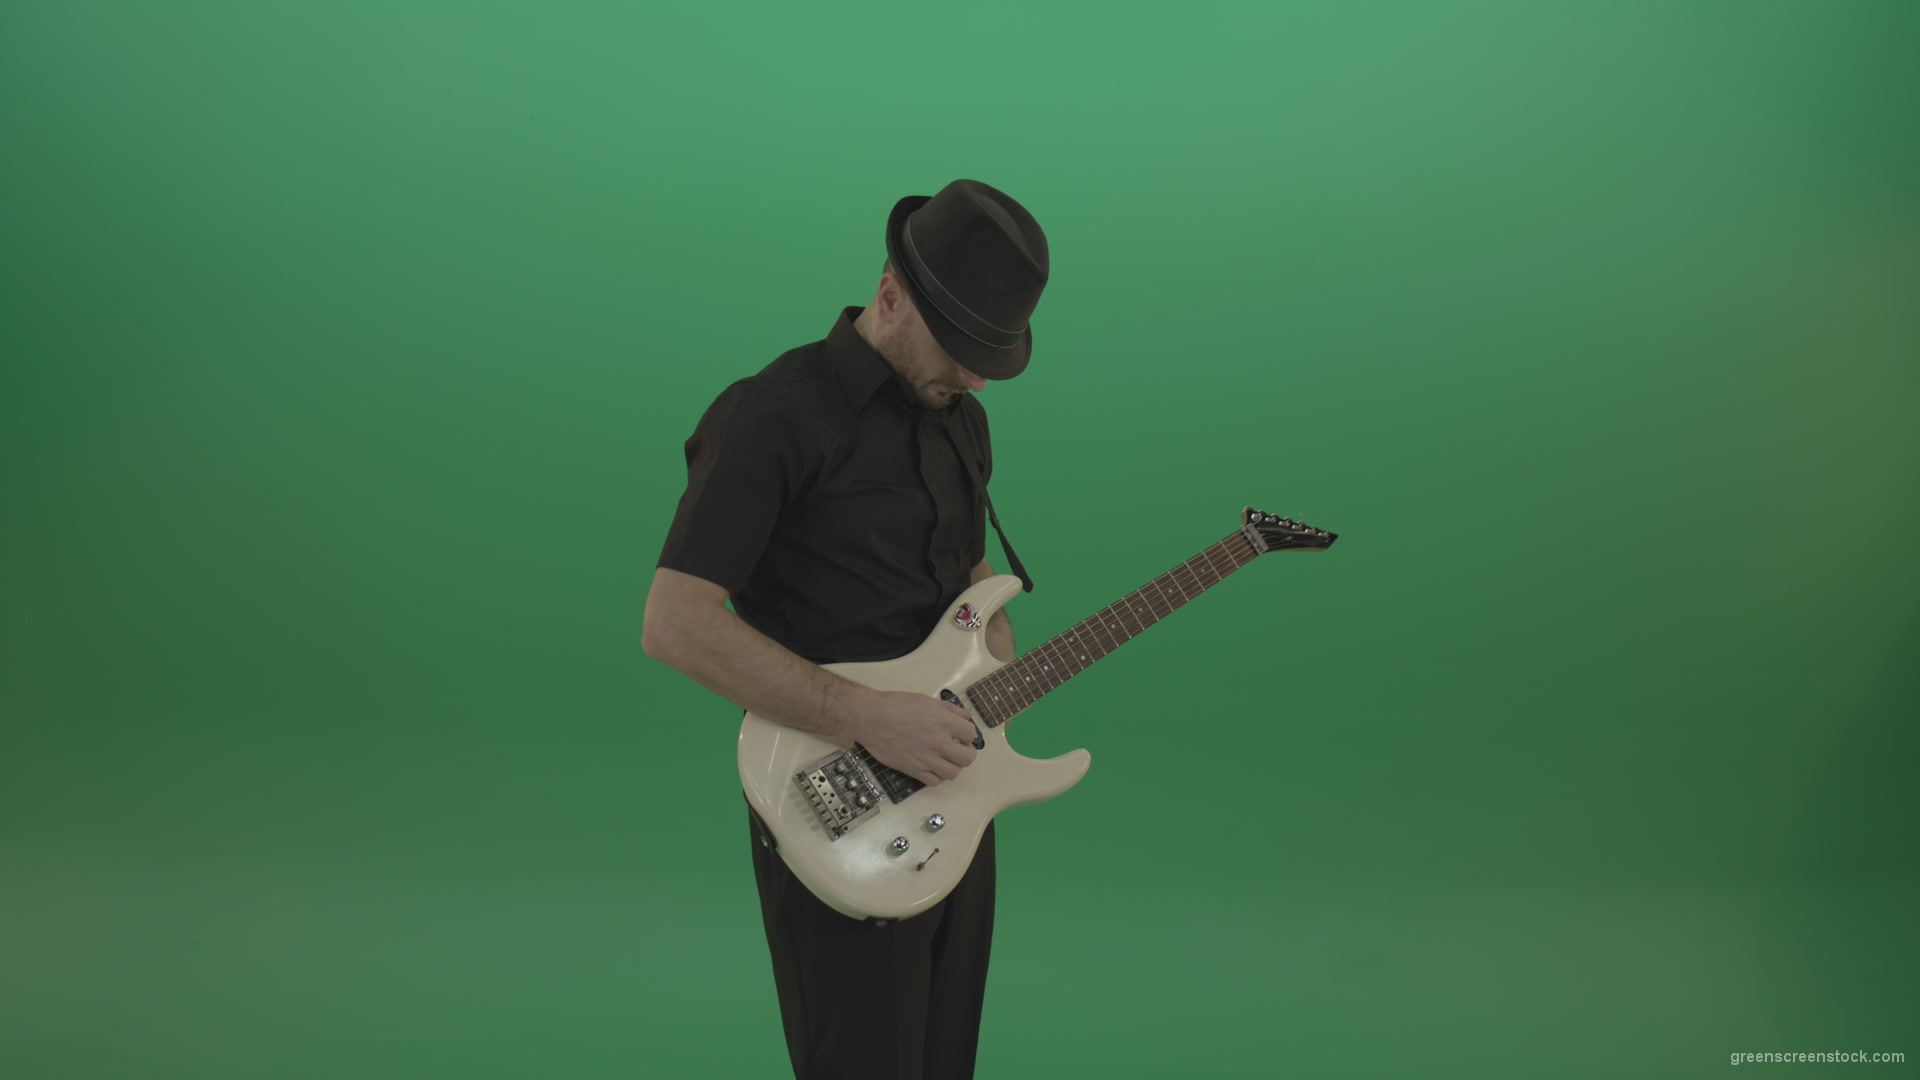 Virtuoso-guitarist-in-black-costume-and-hat-playing-solo-on-white-electro-guitar-siolated-on-green-screen_001 Green Screen Stock